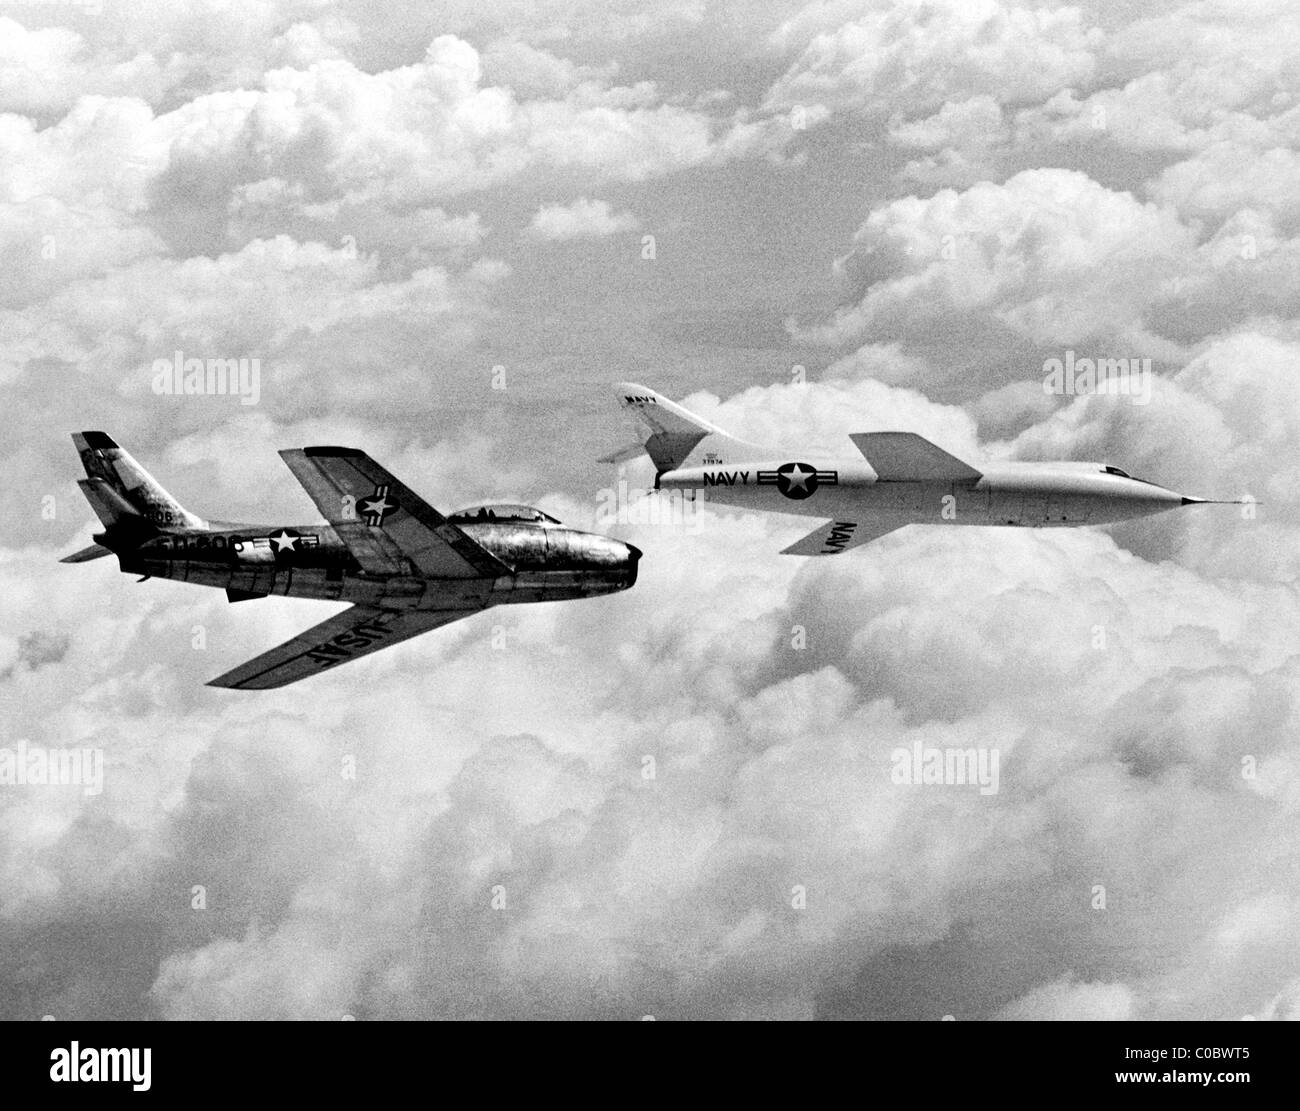 Skyrocket In Flight With F-86 Chase Plane. Stock Photo